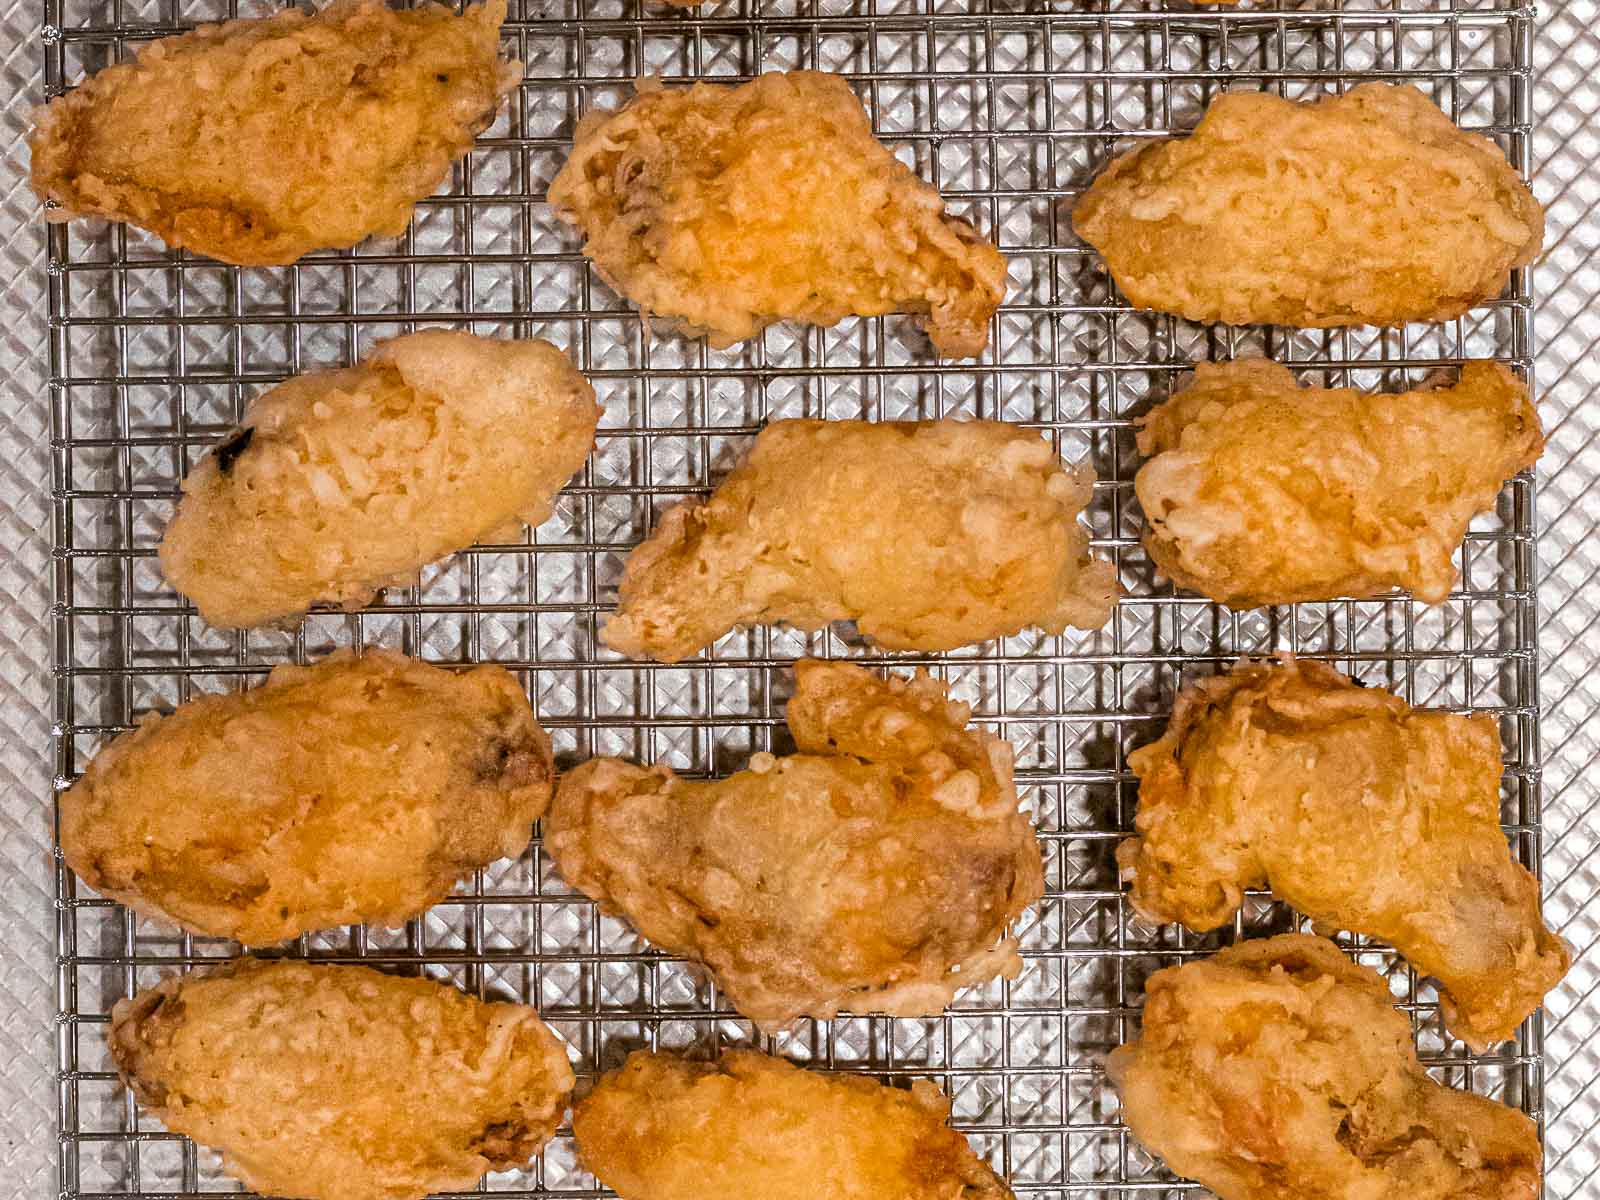 plain Korean fried chicken wings after being double fried resting on a metal cooling rack